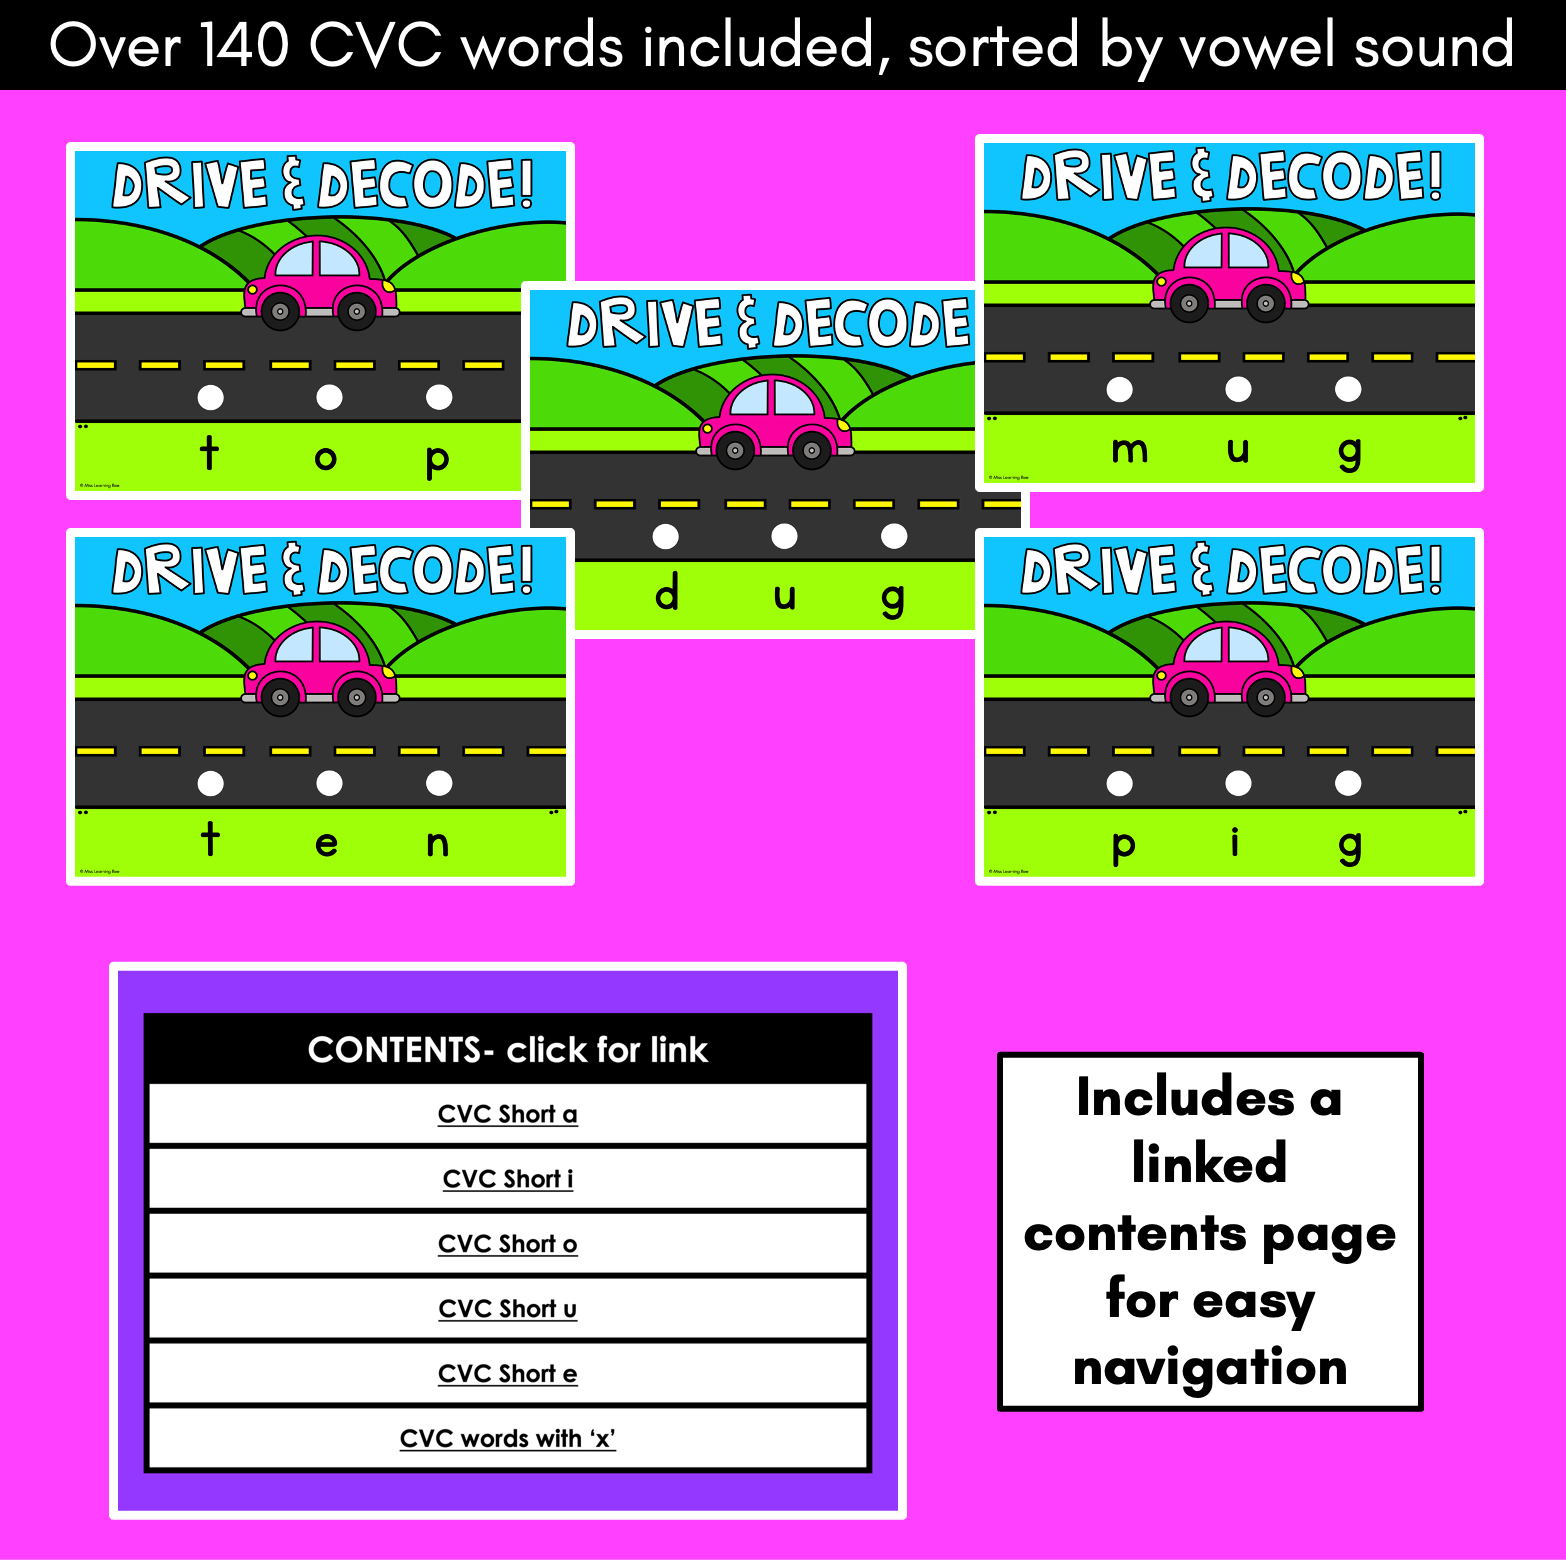 blending-cvc-words-with-cars-drive-decode-mrs-learning-bee